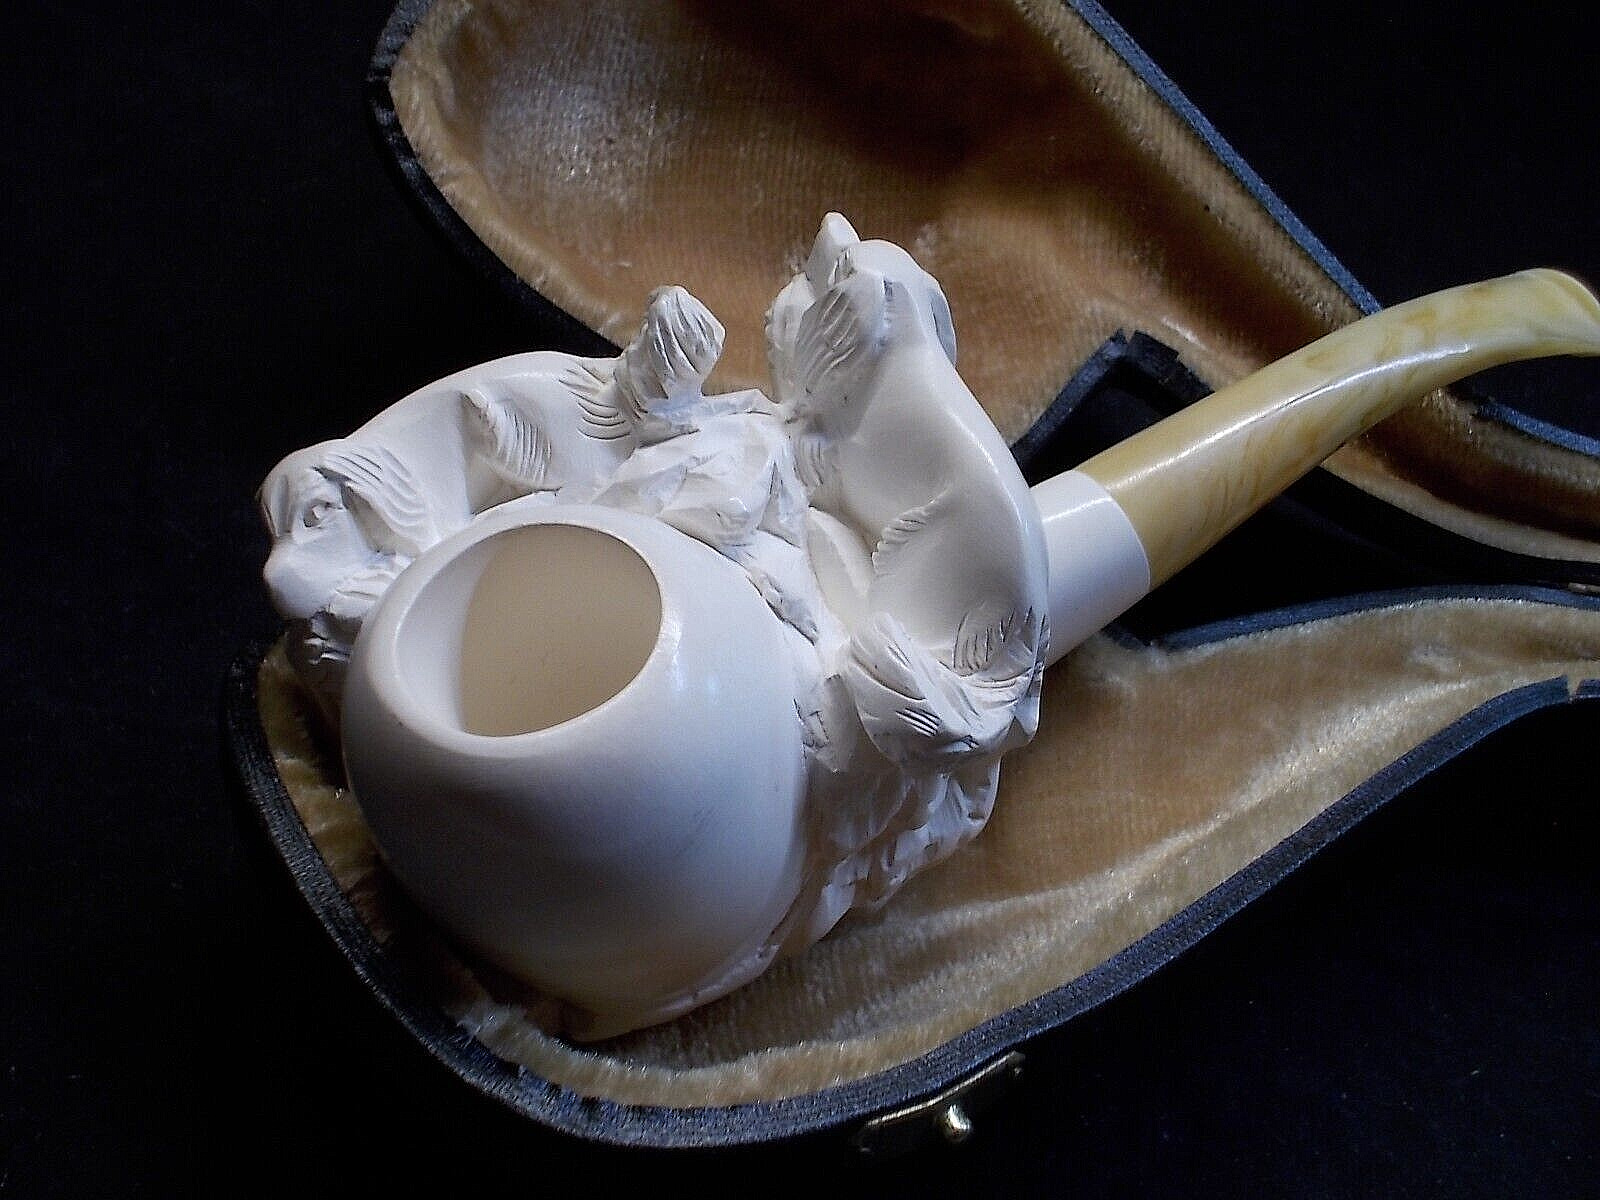 🔴UNSMOKED MEERSCHAUM PIPE FEATURING TWO HUNTING DOGS IN A FITTED CASE